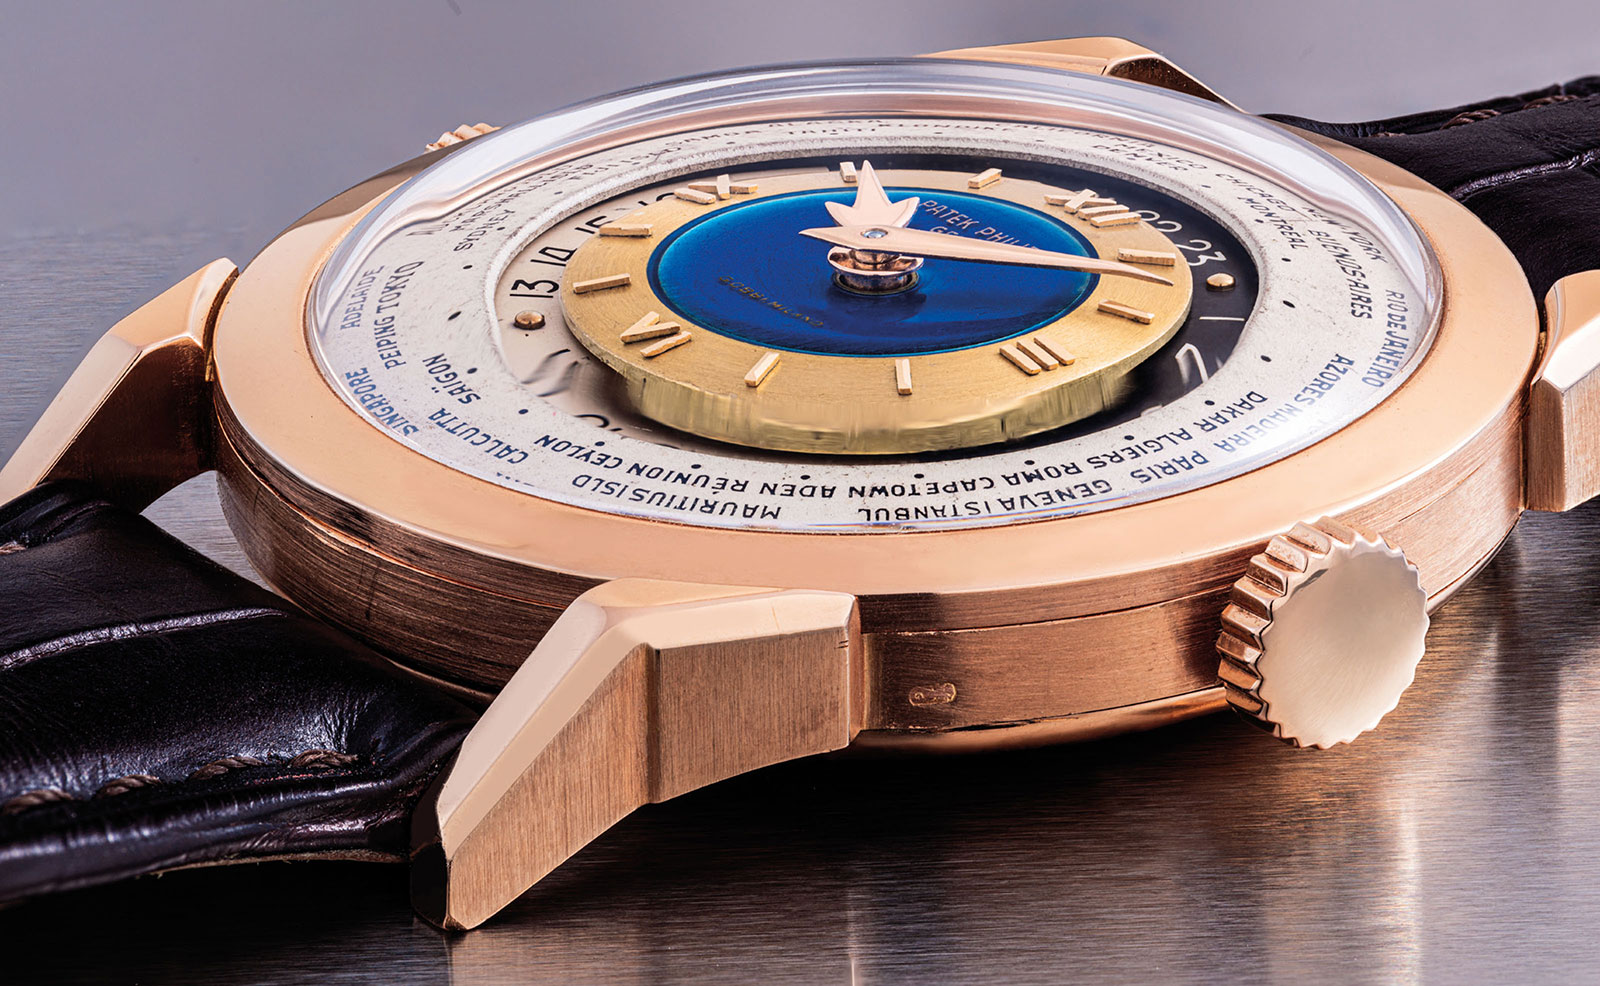 This Patek Philippe is the most expensive watch ever sold online